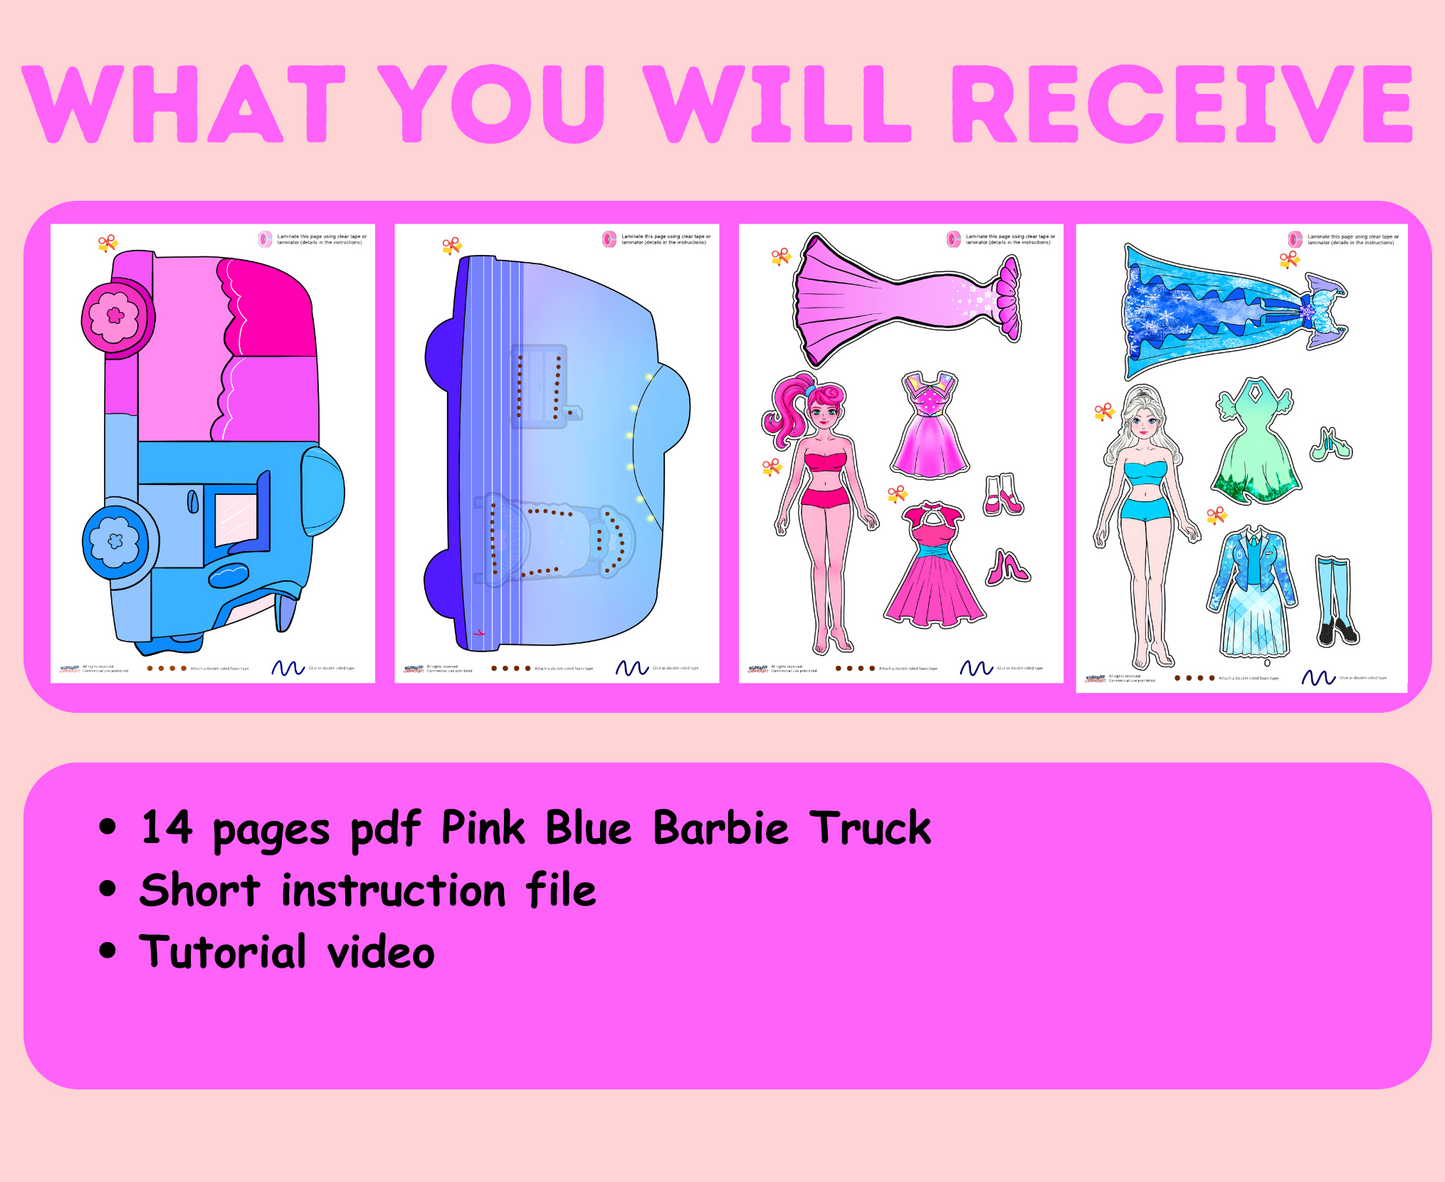 Pink Blue Barbie Truck busy book printable for toddler🌈 handmade activities book to print for kids 🌈 Woa Doll Crafts